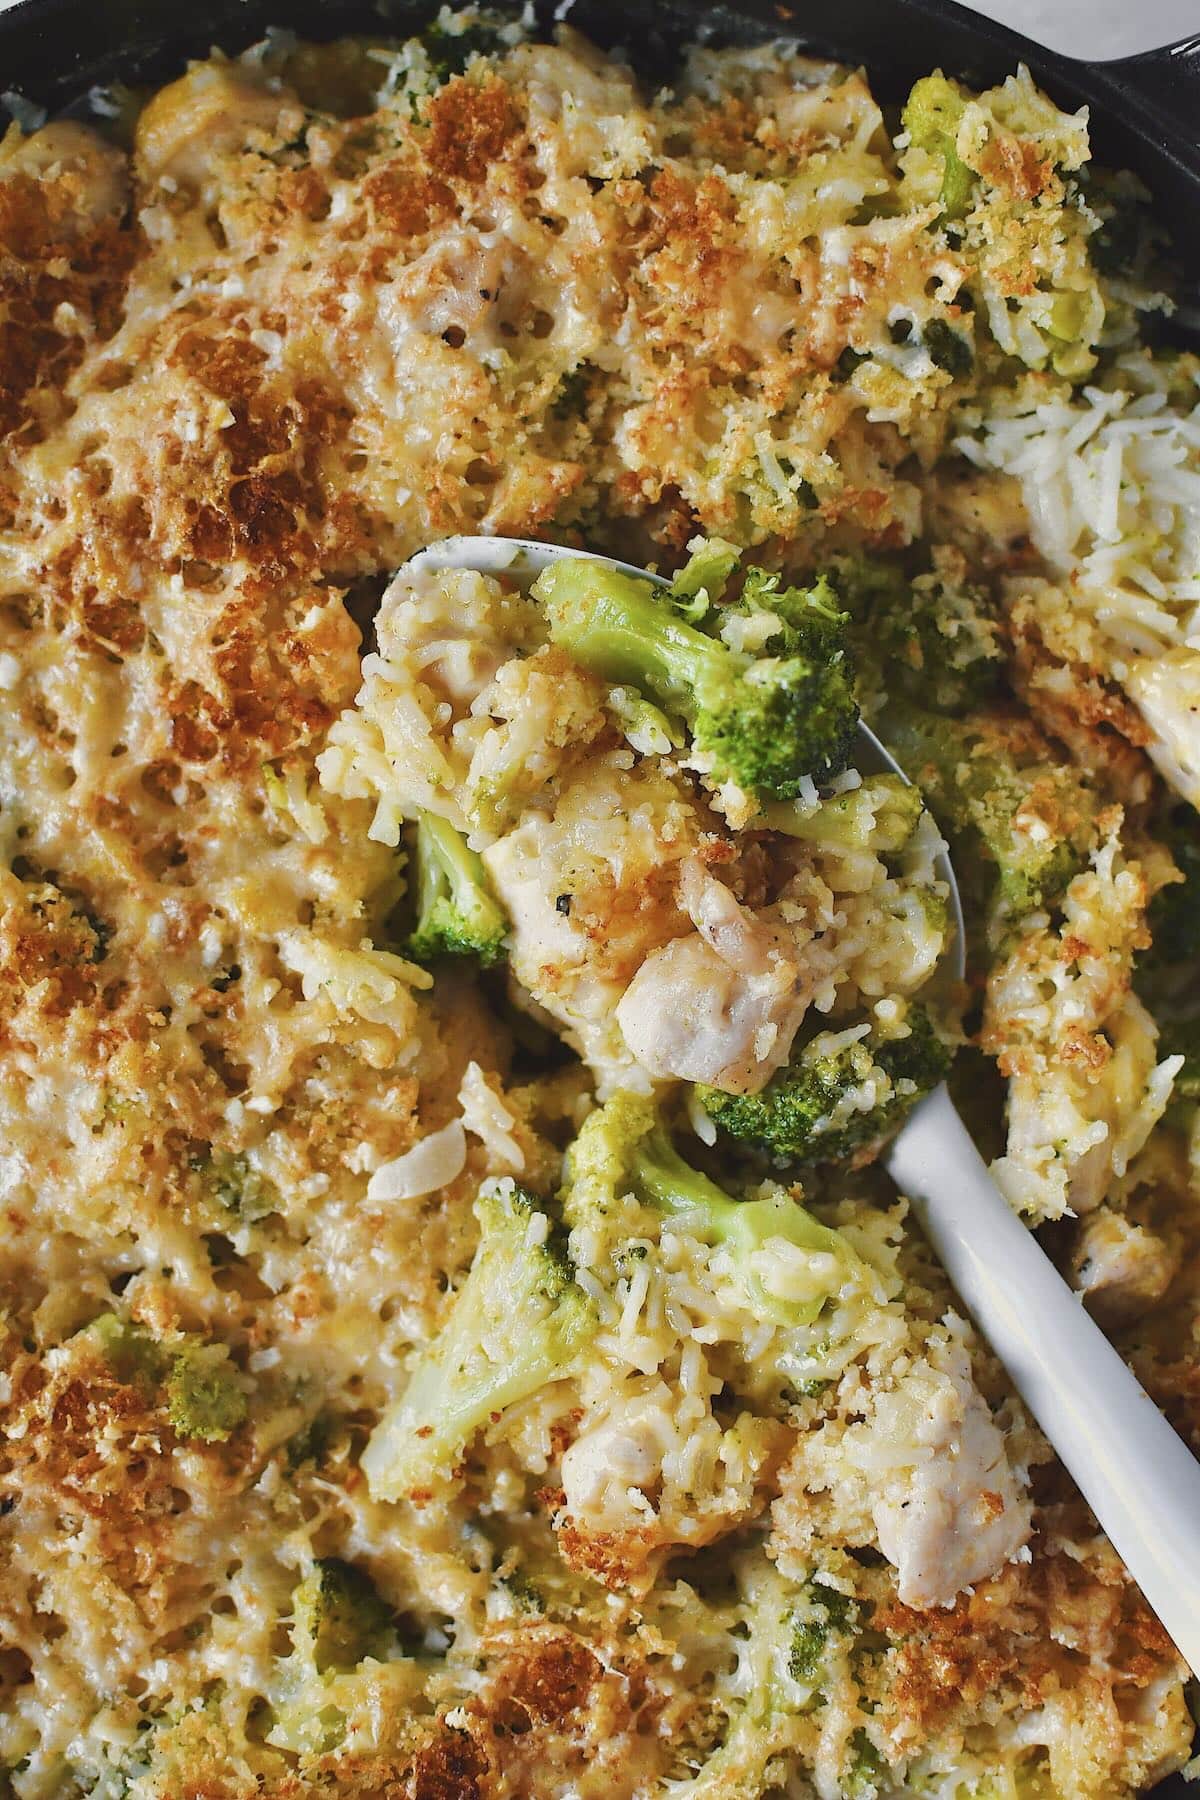 Scooping out some Chicken and Broccoli Rice Casserole.